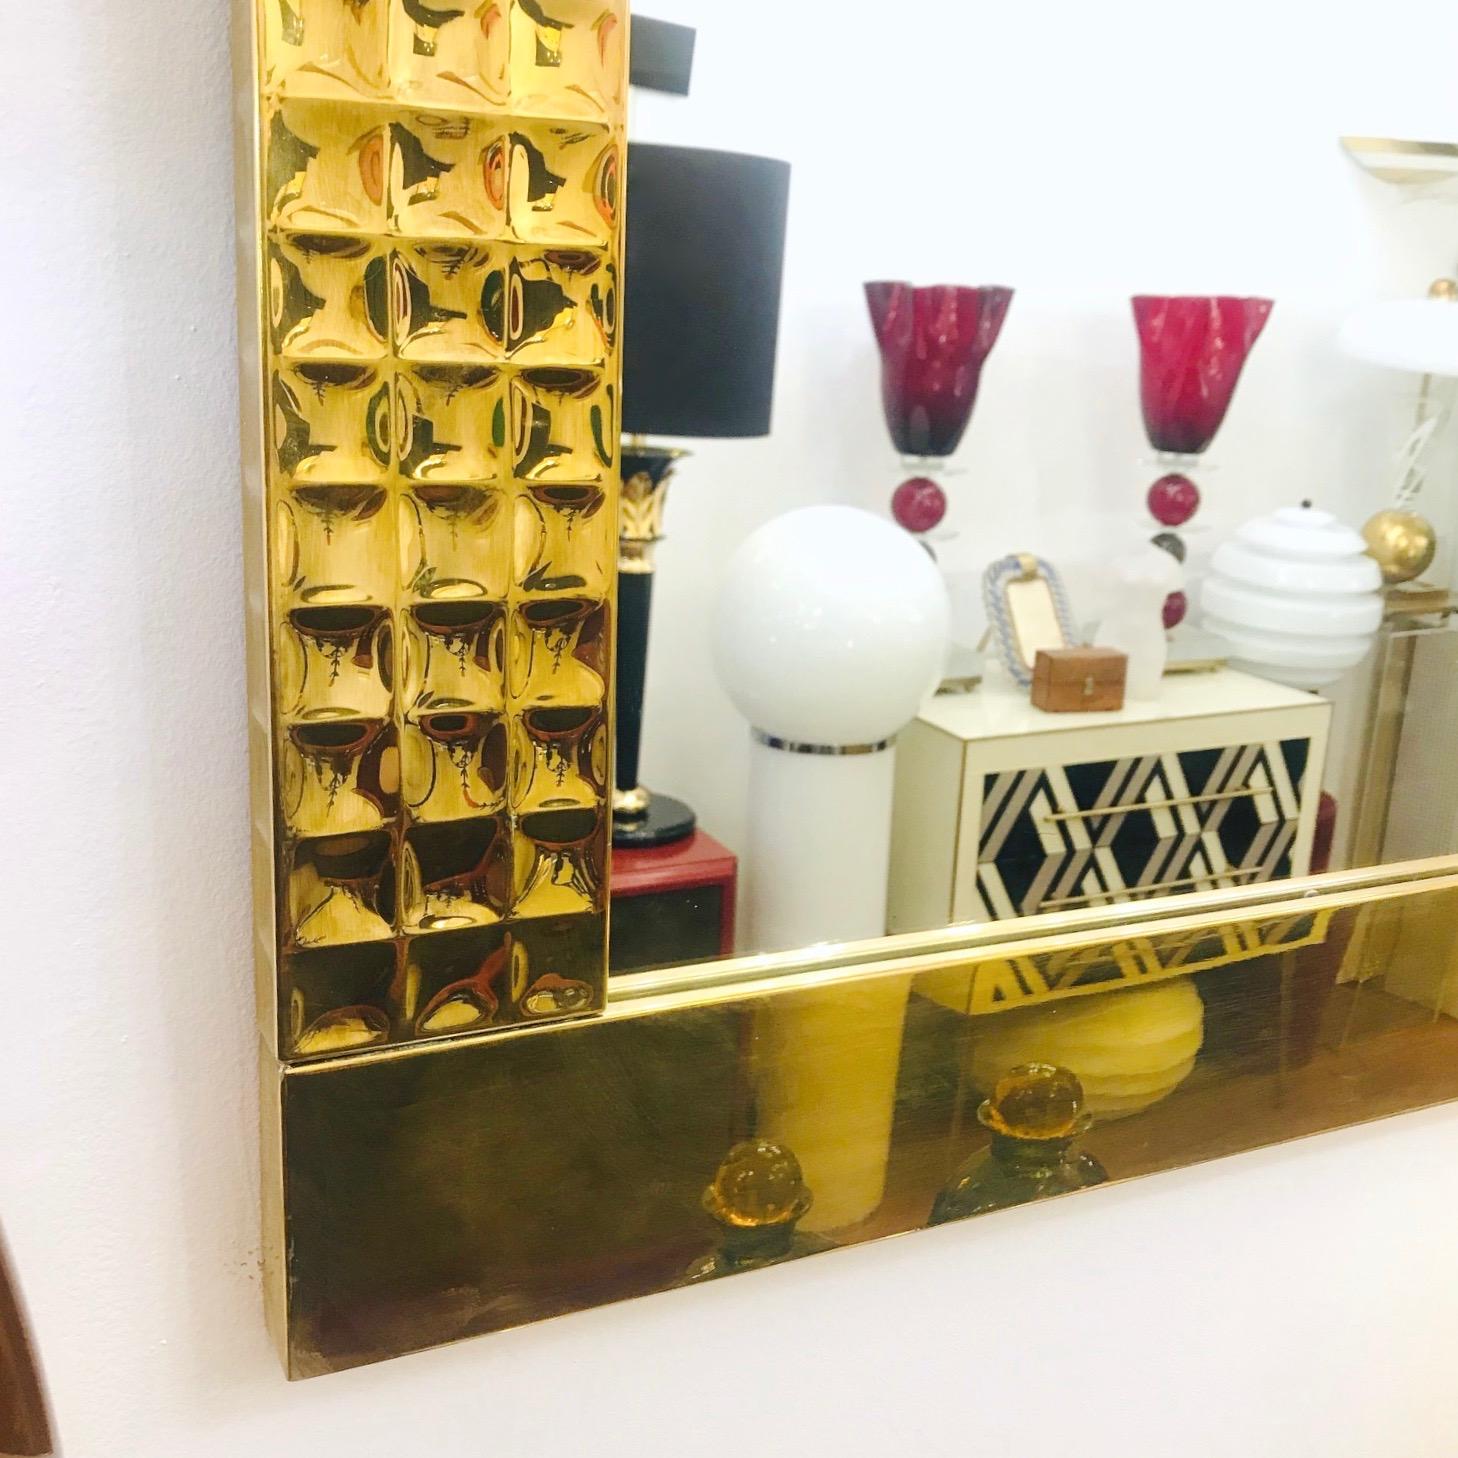 Hammered Italian Handcrafted Brass Mirrors with Gold Jewel-Like Detail, 1970s For Sale